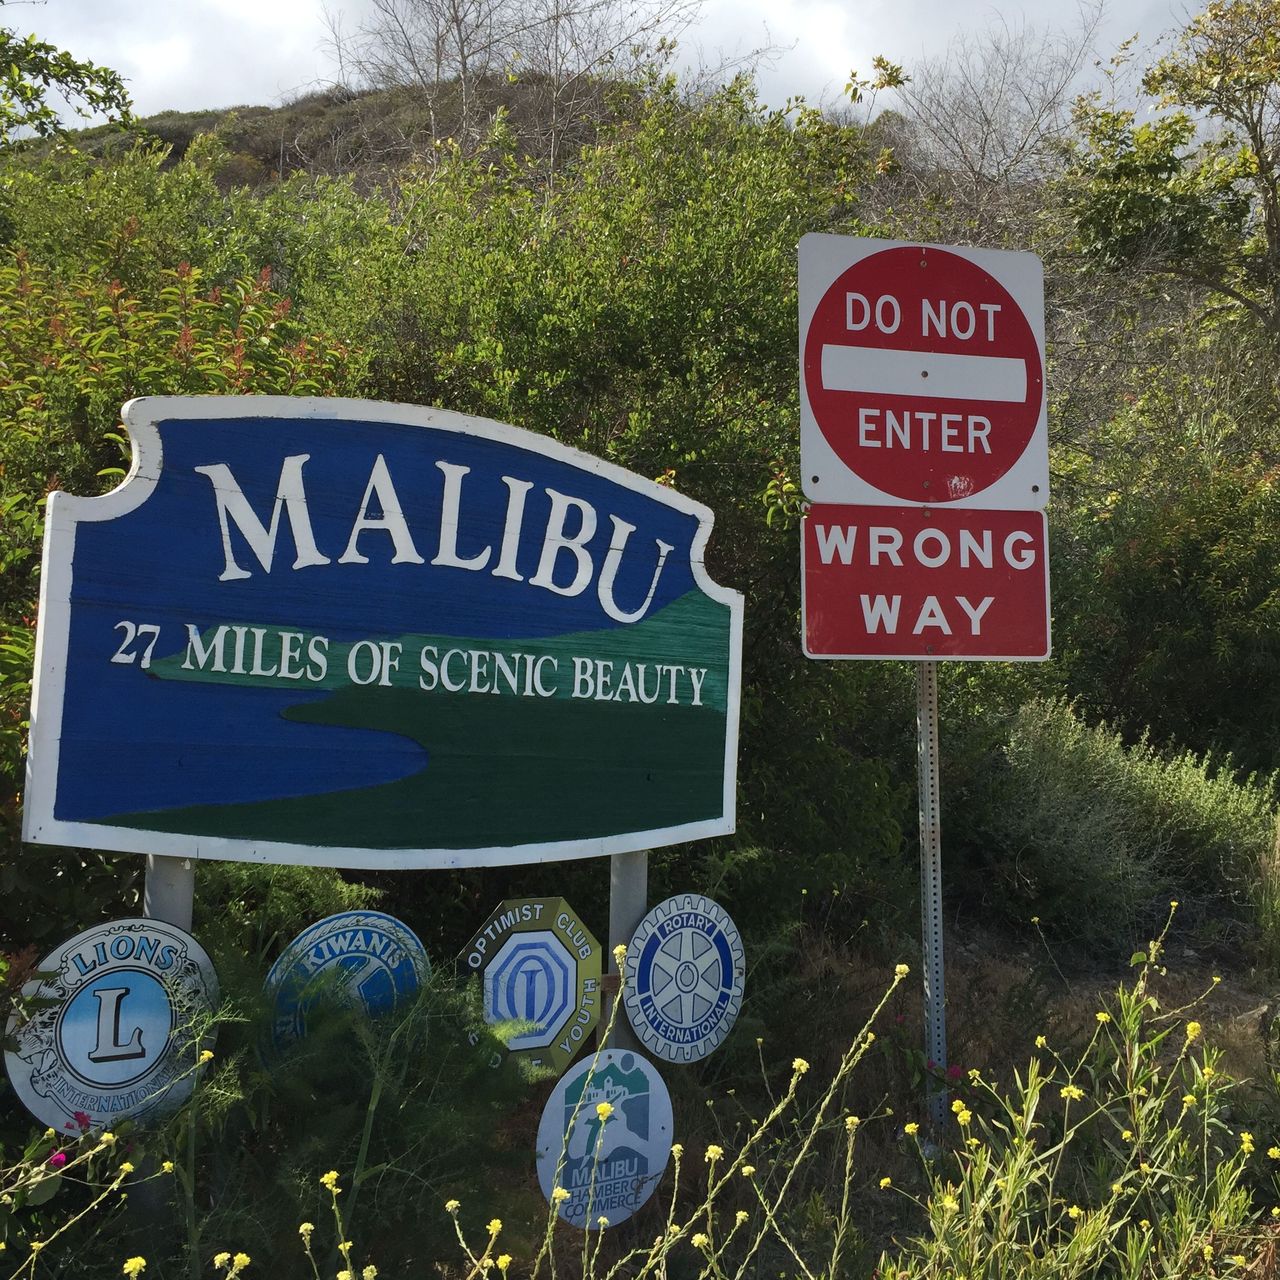 The exit to Tuna Canyon Road is marked by this Malibu and 'Wrong Way' sign